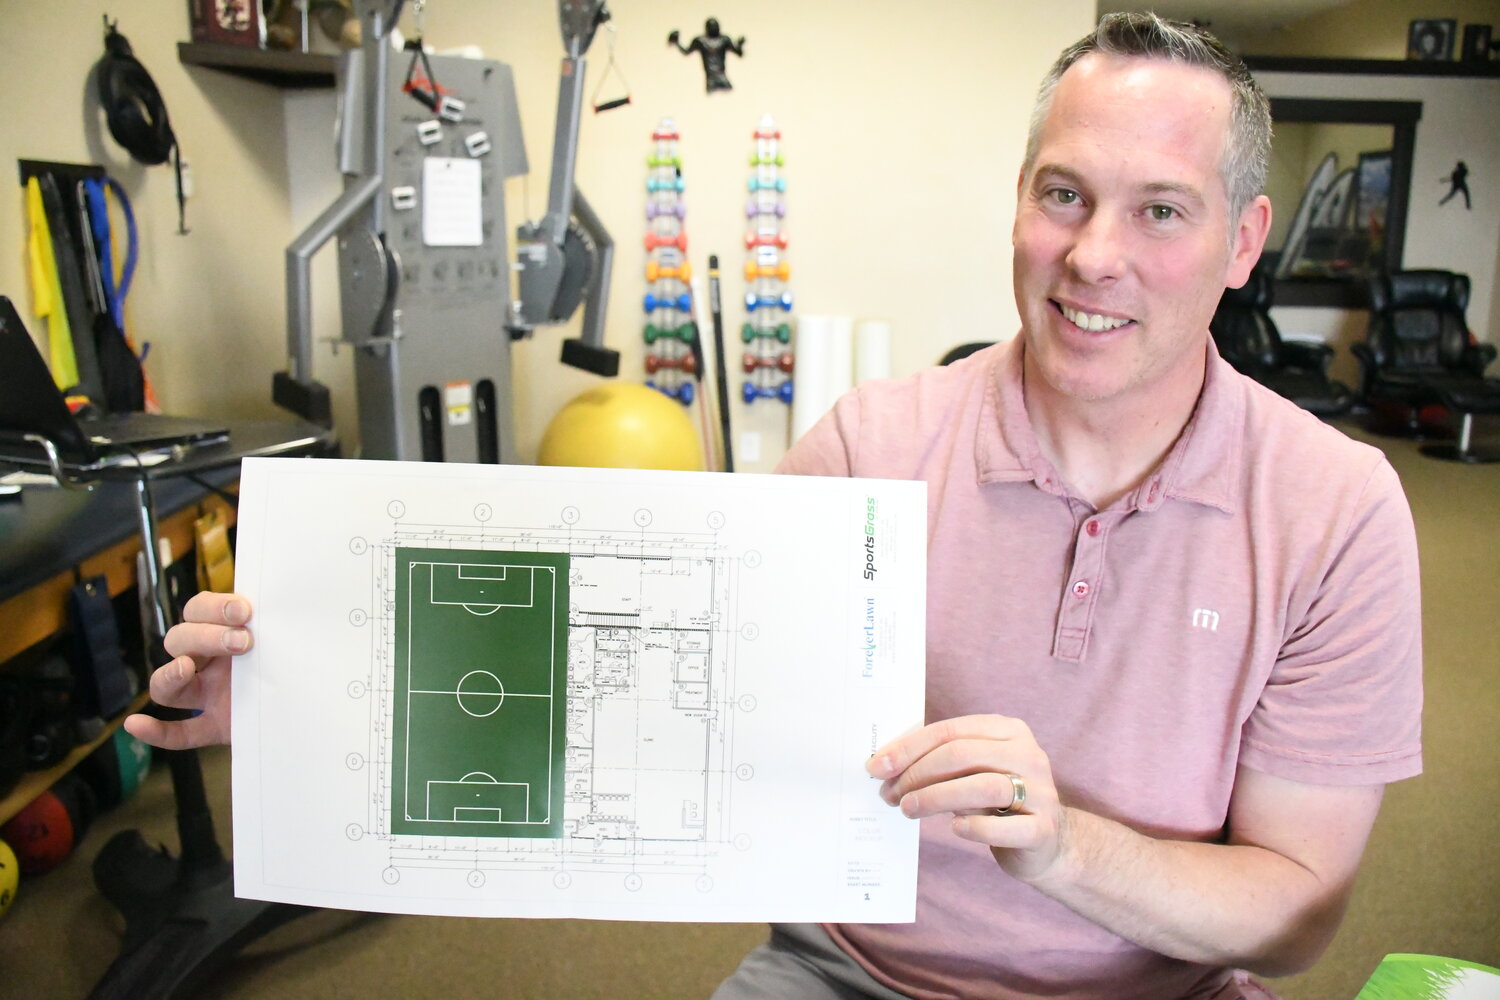 Dr. Justin Dennis of Evanston’s Impact Physical Therapy shows plans for an indoor turf field he’s been working to bring to Evanston. The field would be for community use but would charge a pay-per-use fee.